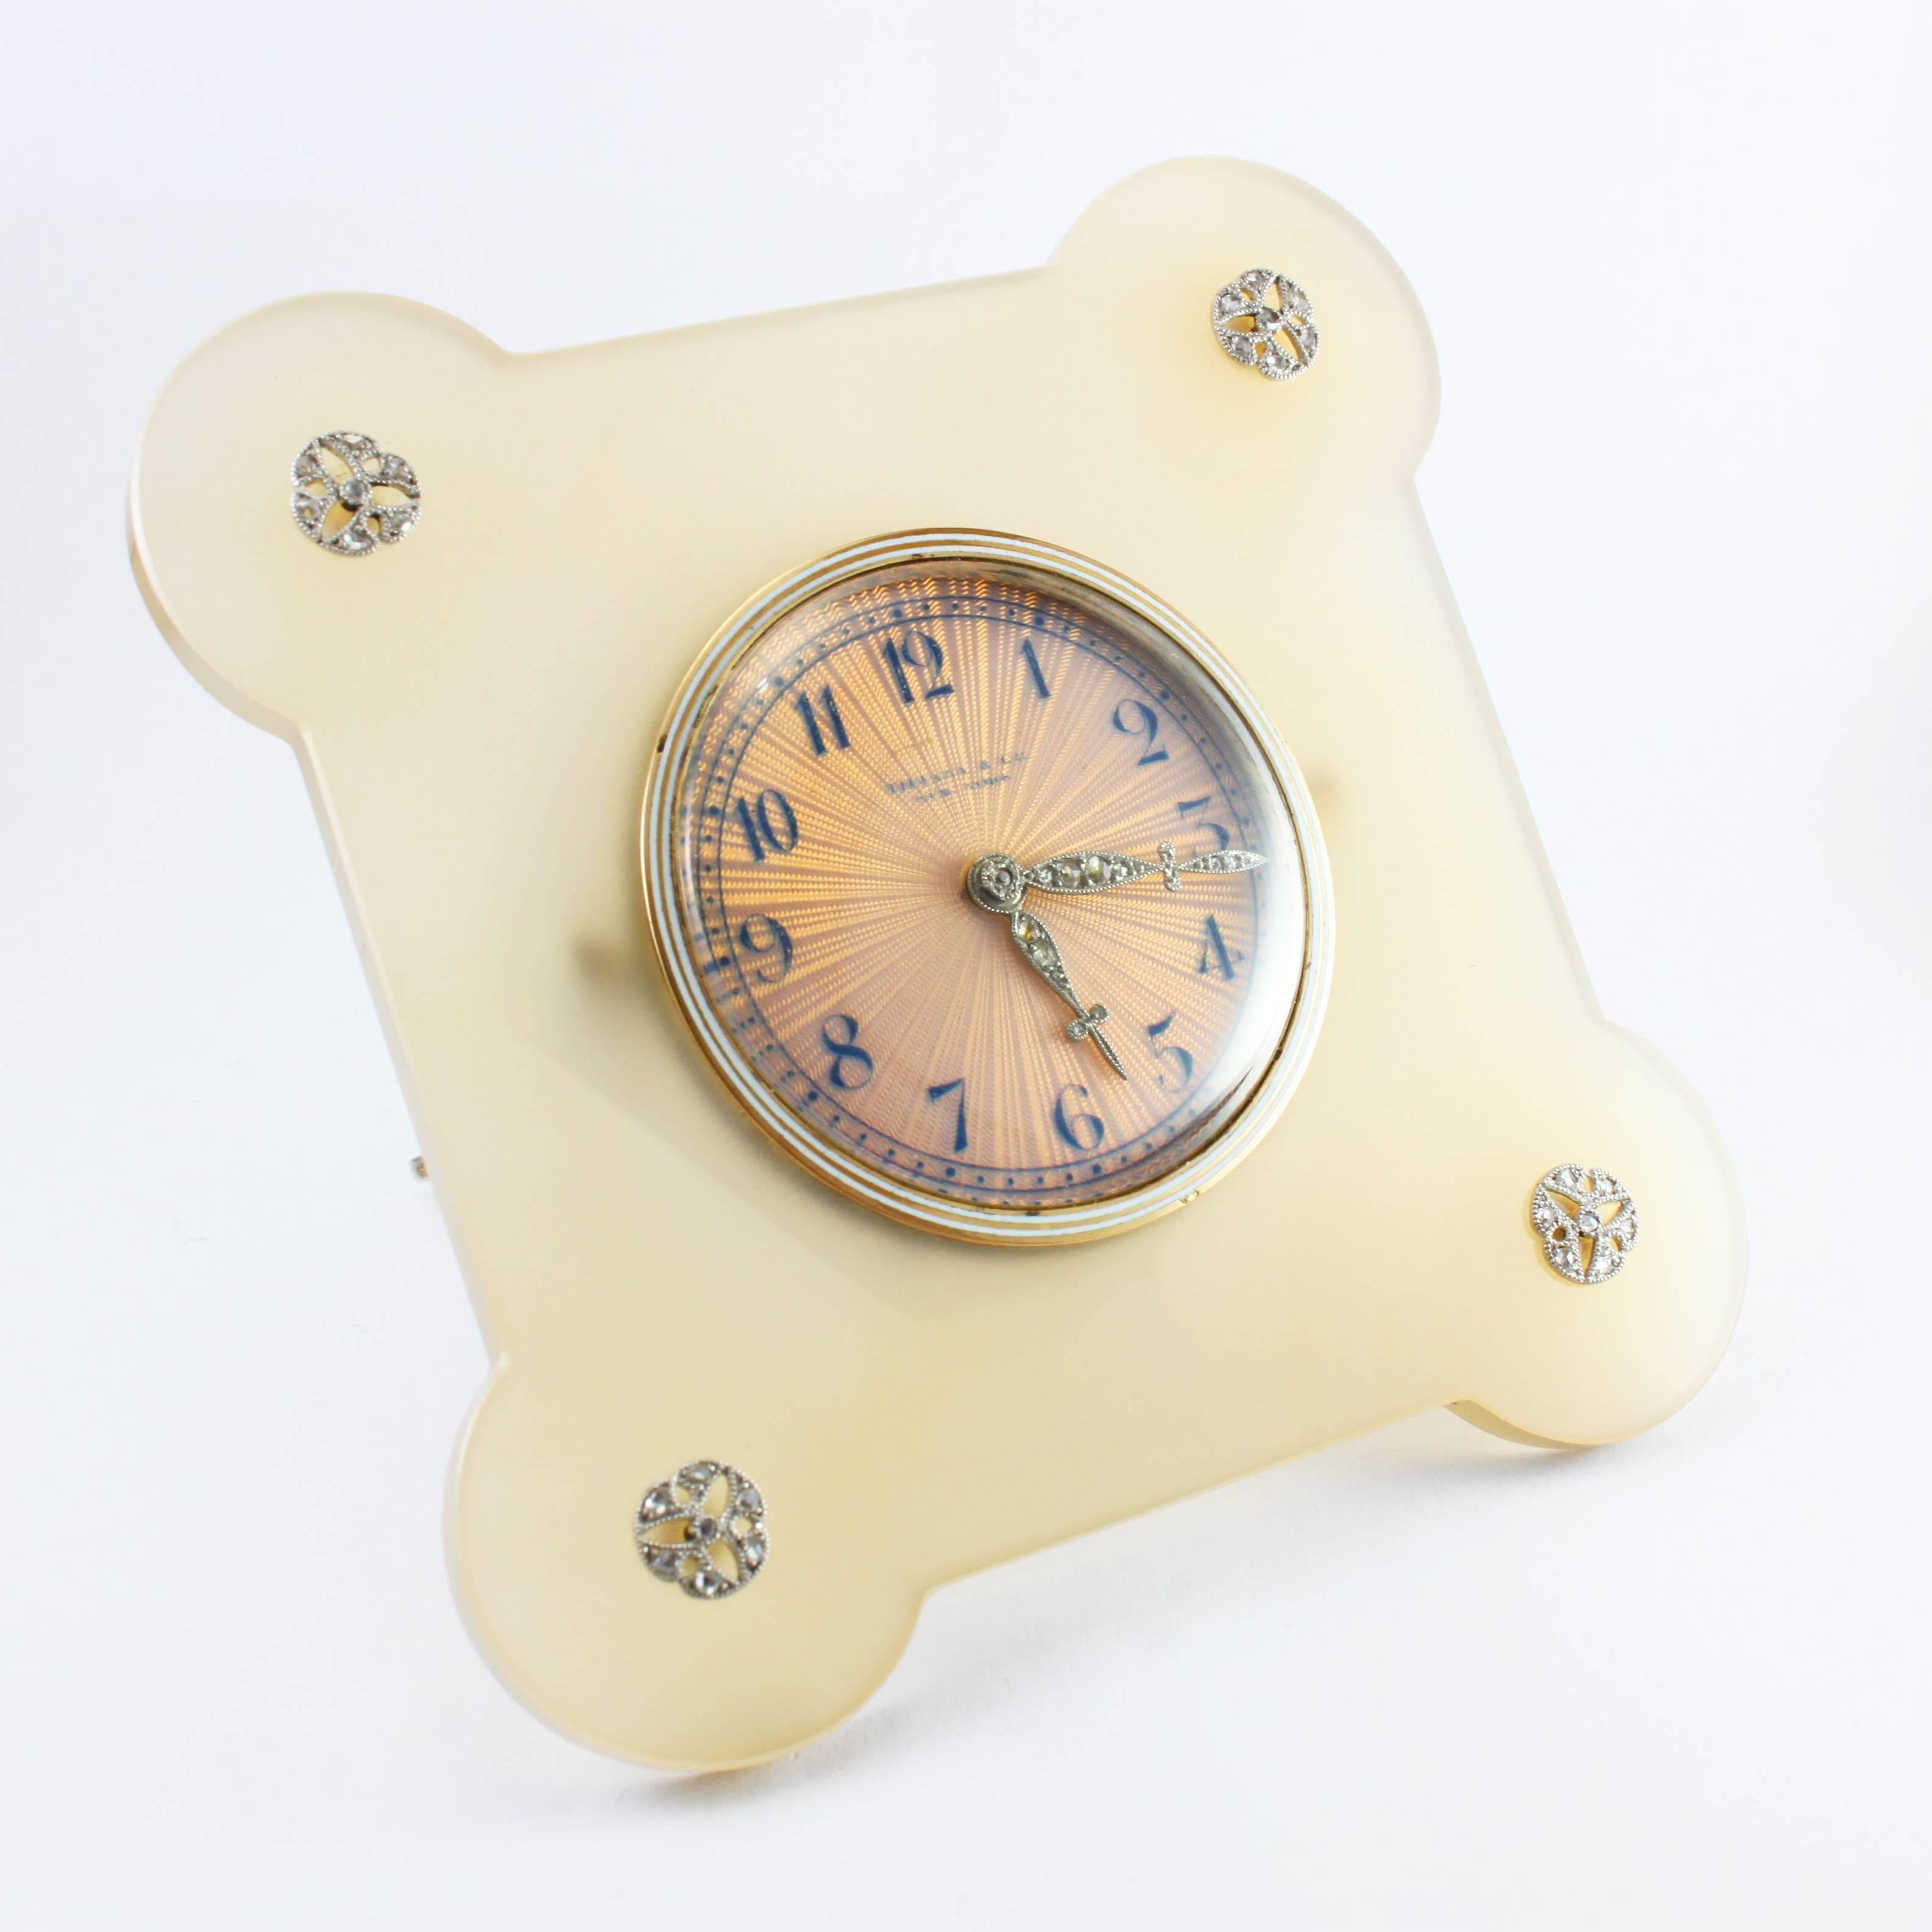 An important Art Deco Tiffany & Co Diamond and Agate Desk Clock, ca. 1920s

The desk clock is based on an agate with rounded corners, each centring a floral diamond cluster. 

The clock's dial is beautifully made in a reflective salmon-colored